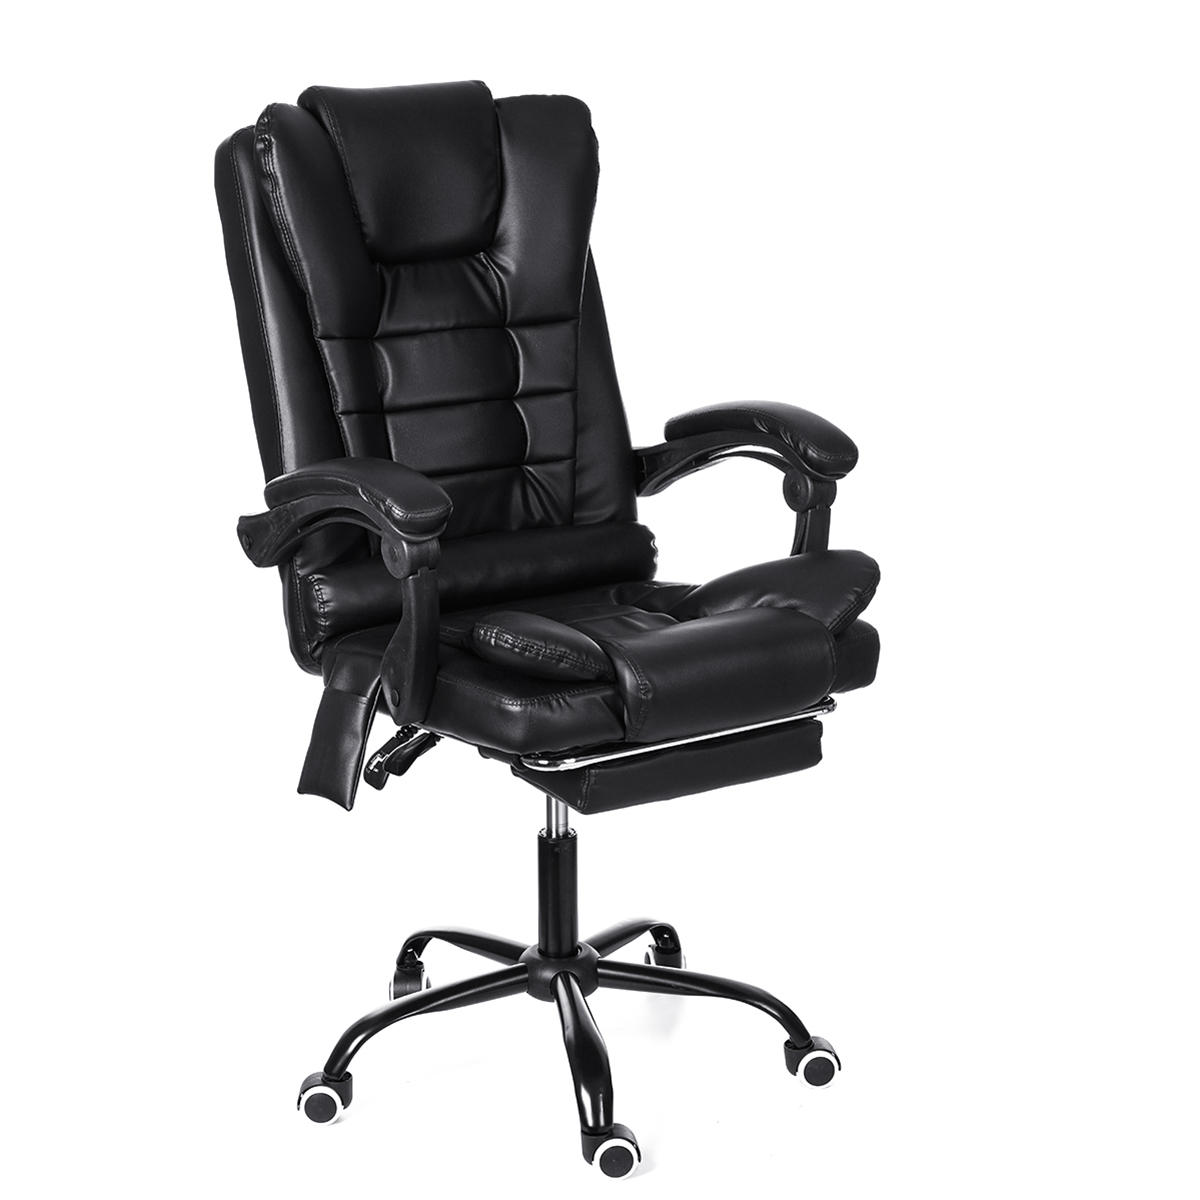 Image of Snailhome Massage Reclining OfficeChair Adjustable Height Rotating Lift Chair PU Leather Gaming Chair Laptop Desk Chai